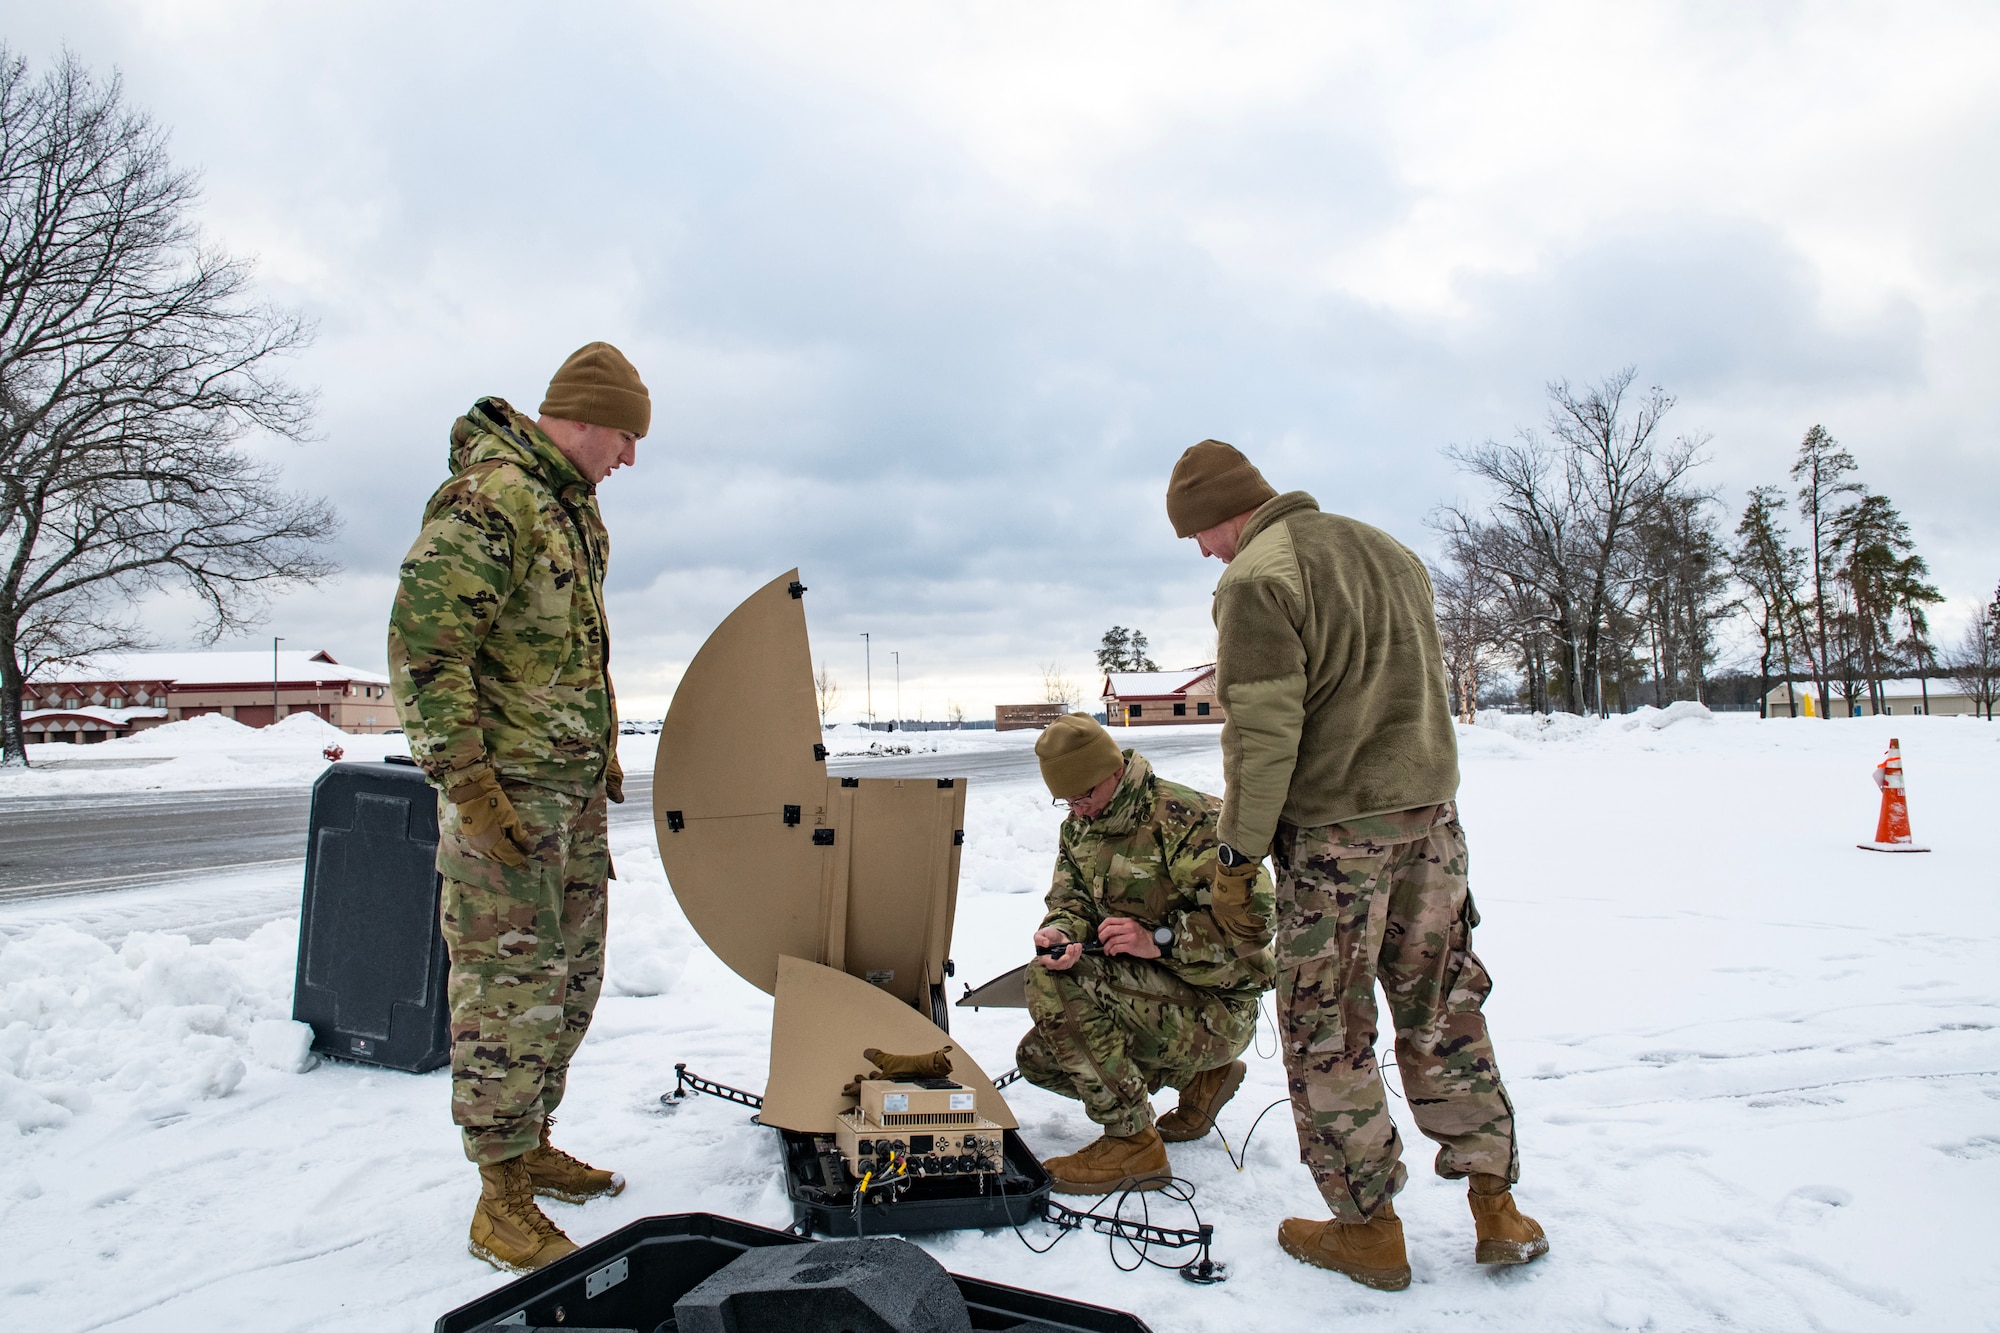 U.S. Air Force Airmen from the 290th Joint Communications Support Squadron set up satellite terminals during an exercise Feb. 10, 2023, at Alpena Combat Readiness Training Center, Michigan. The exercise tested their ability to establish communication in extreme cold. (This photo has been altered for security purposes by blurring sensitive information.)